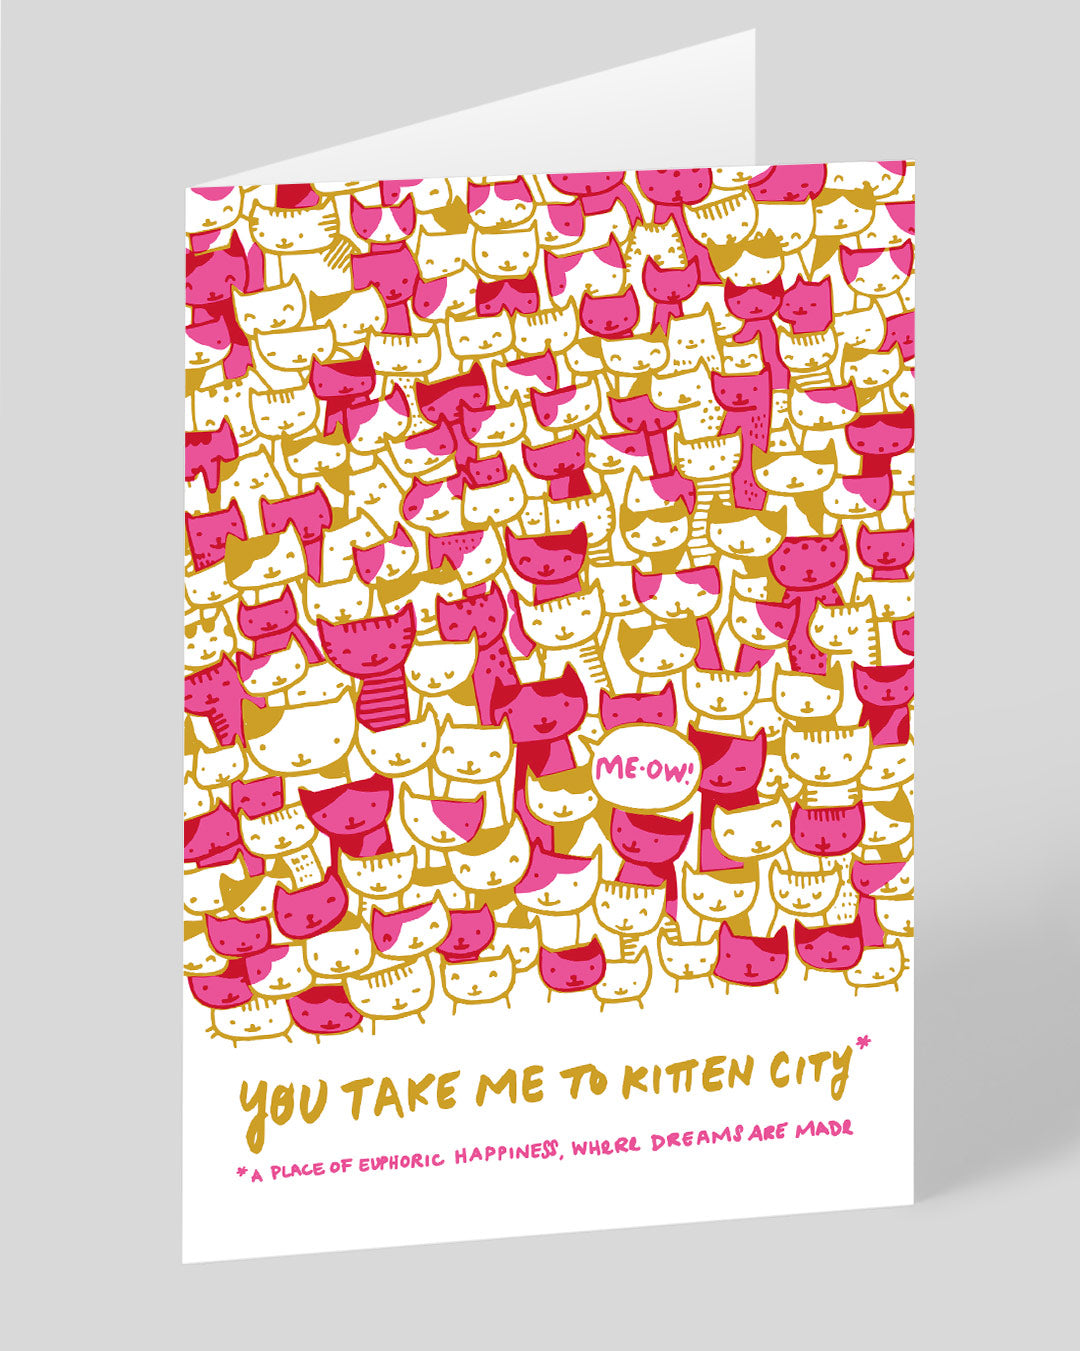 Valentine’s Day | Cute Valentines Card For Cat Lovers | Personalised Kitten City Greeting Card | Ohh Deer Unique Valentine’s Card for Him or Her | Made In The UK, Eco-Friendly Materials, Plastic Free Packaging